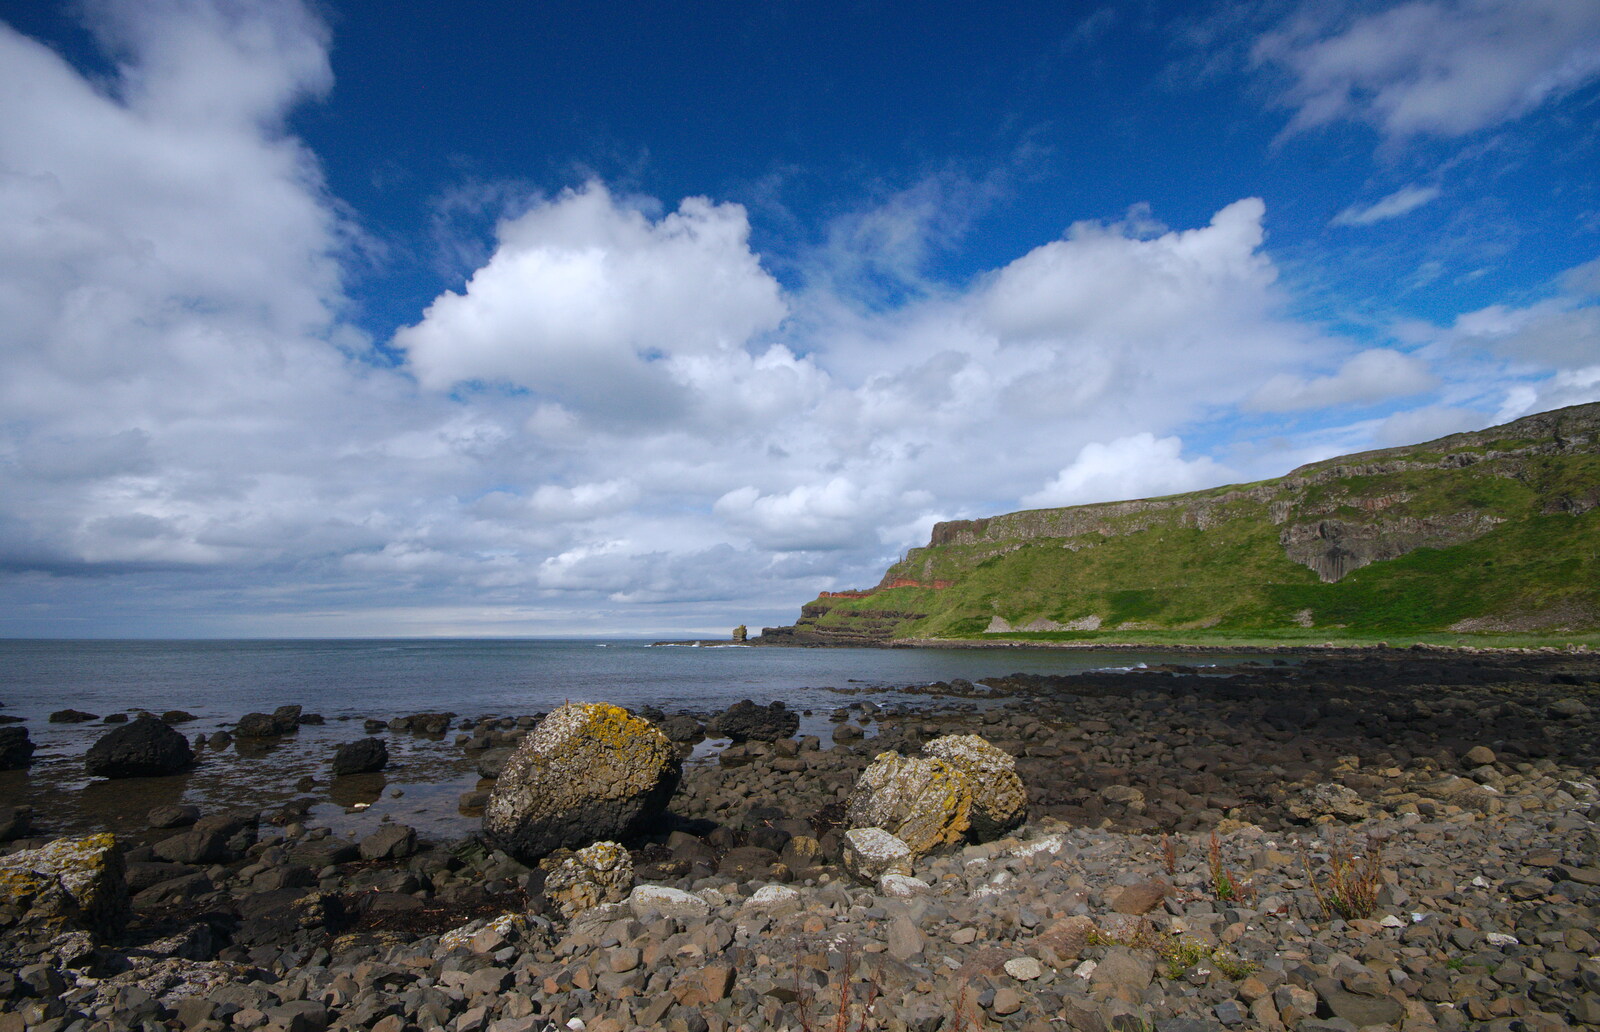 A nice view from The Giant's Causeway, Bushmills, County Antrim, Northern Ireland - 14th August 2019